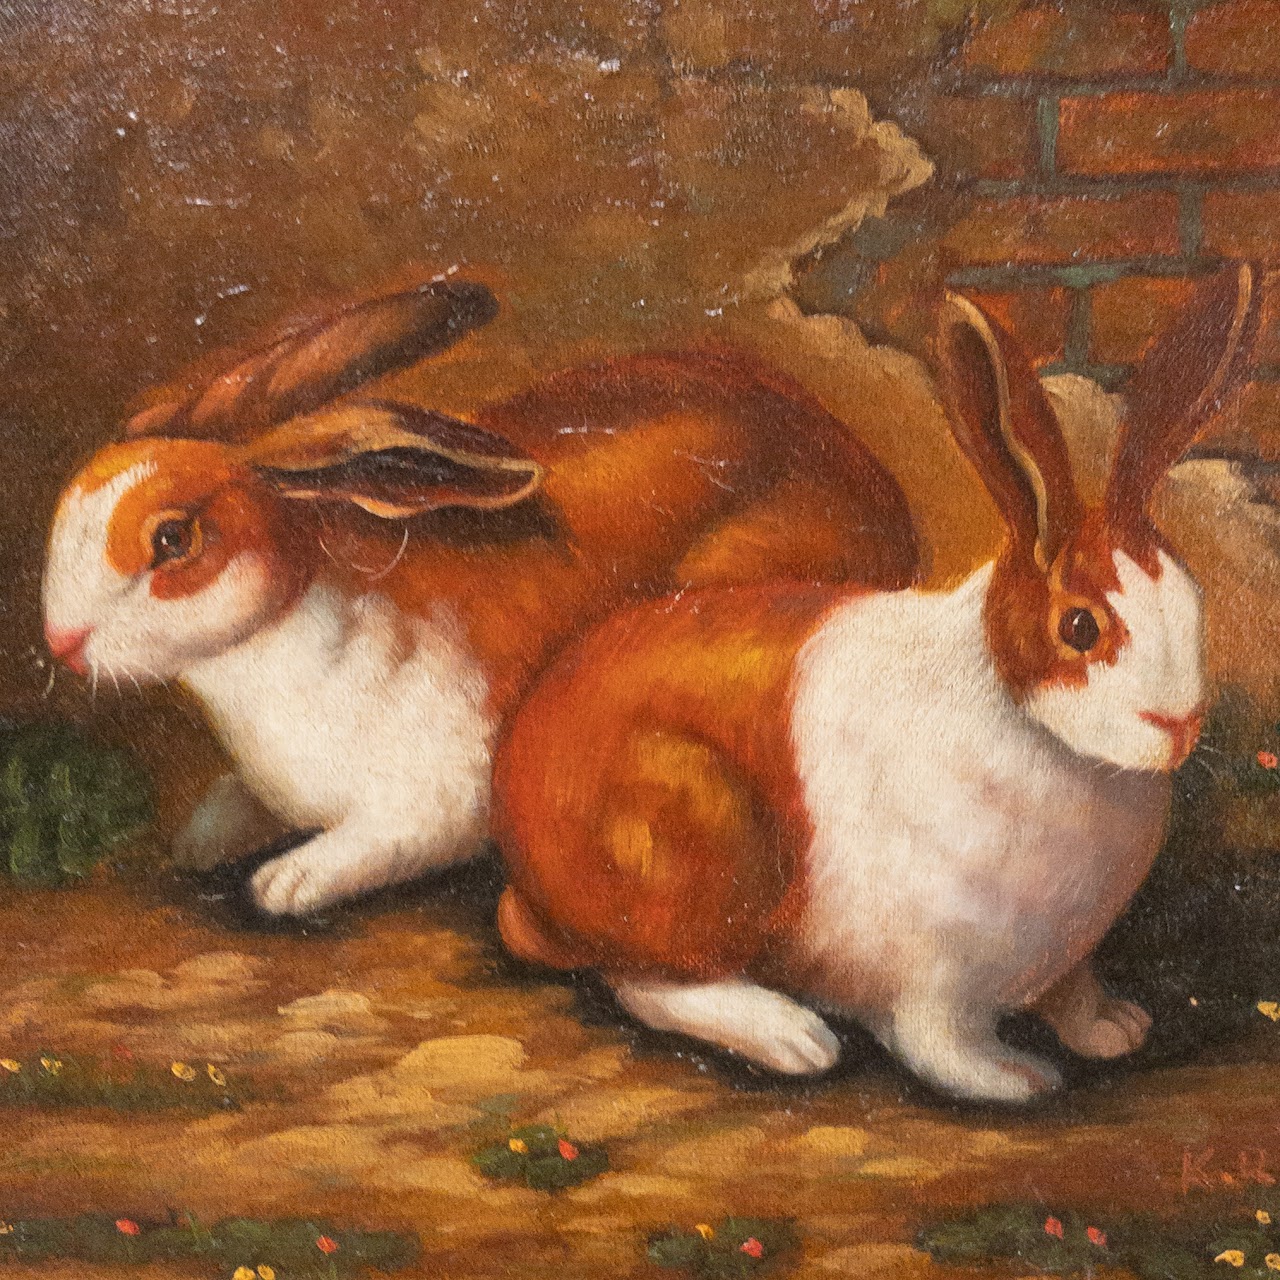 K. Richards Signed Bunny Oil Painting